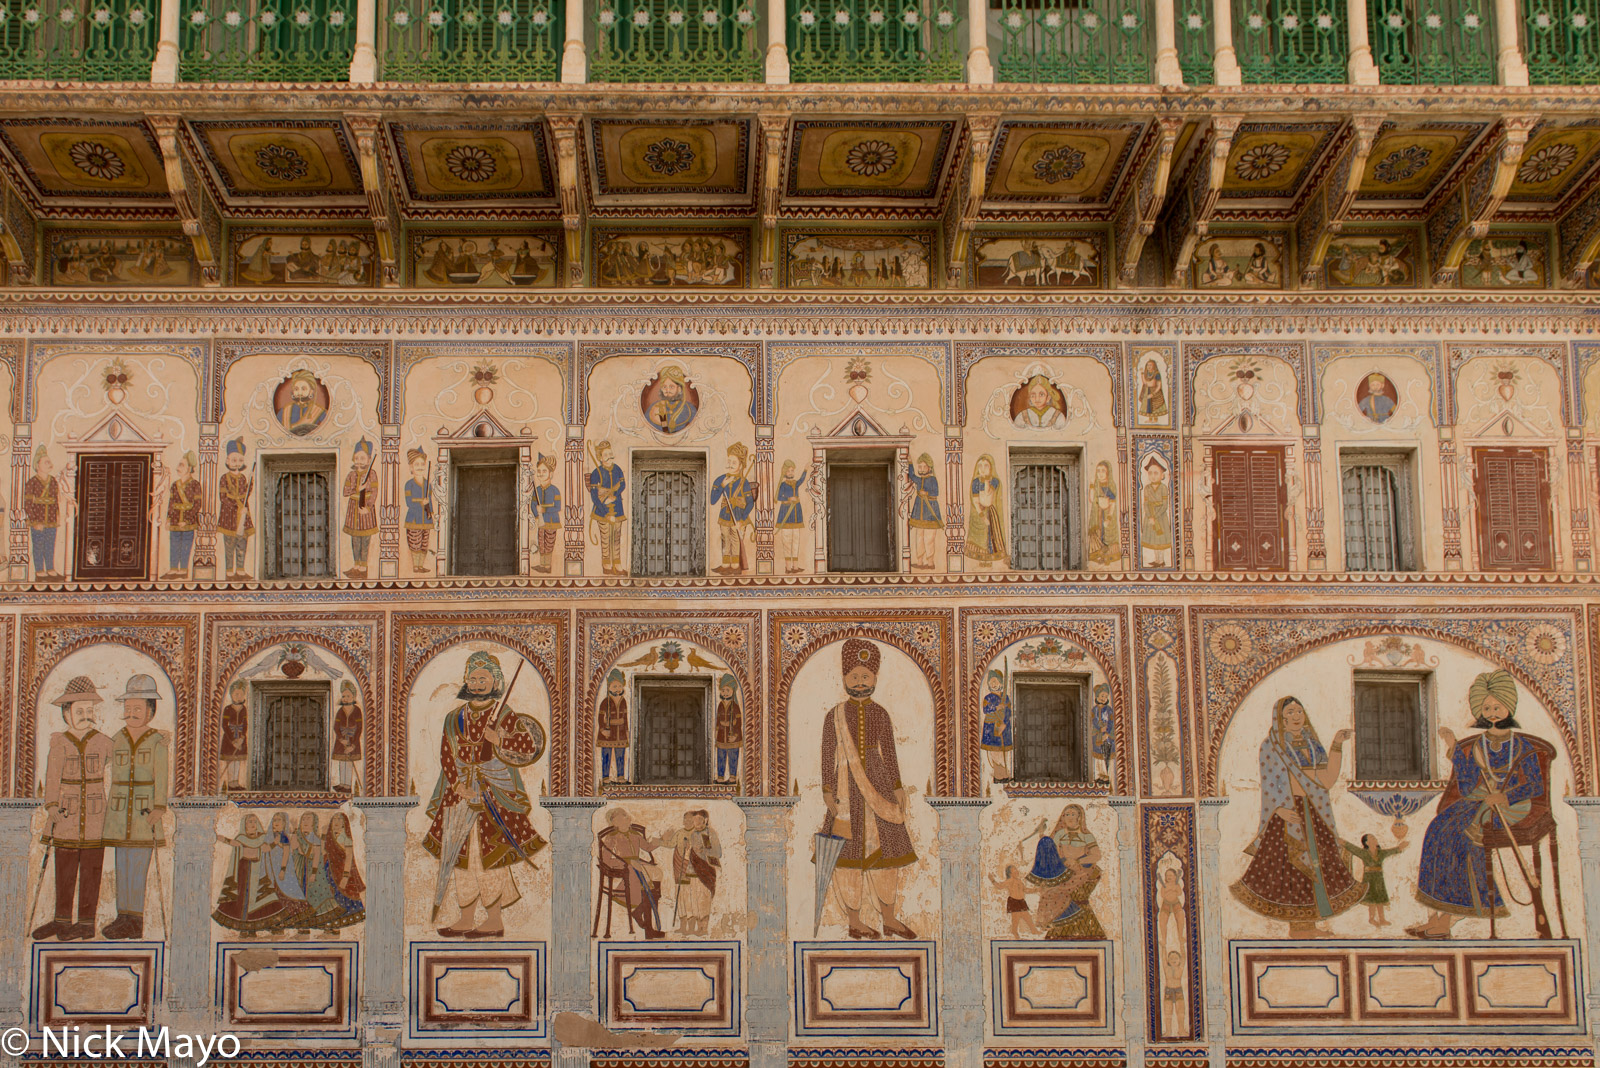 Murals on an exterior wall of the Podar Haveli at Nawalgarh.